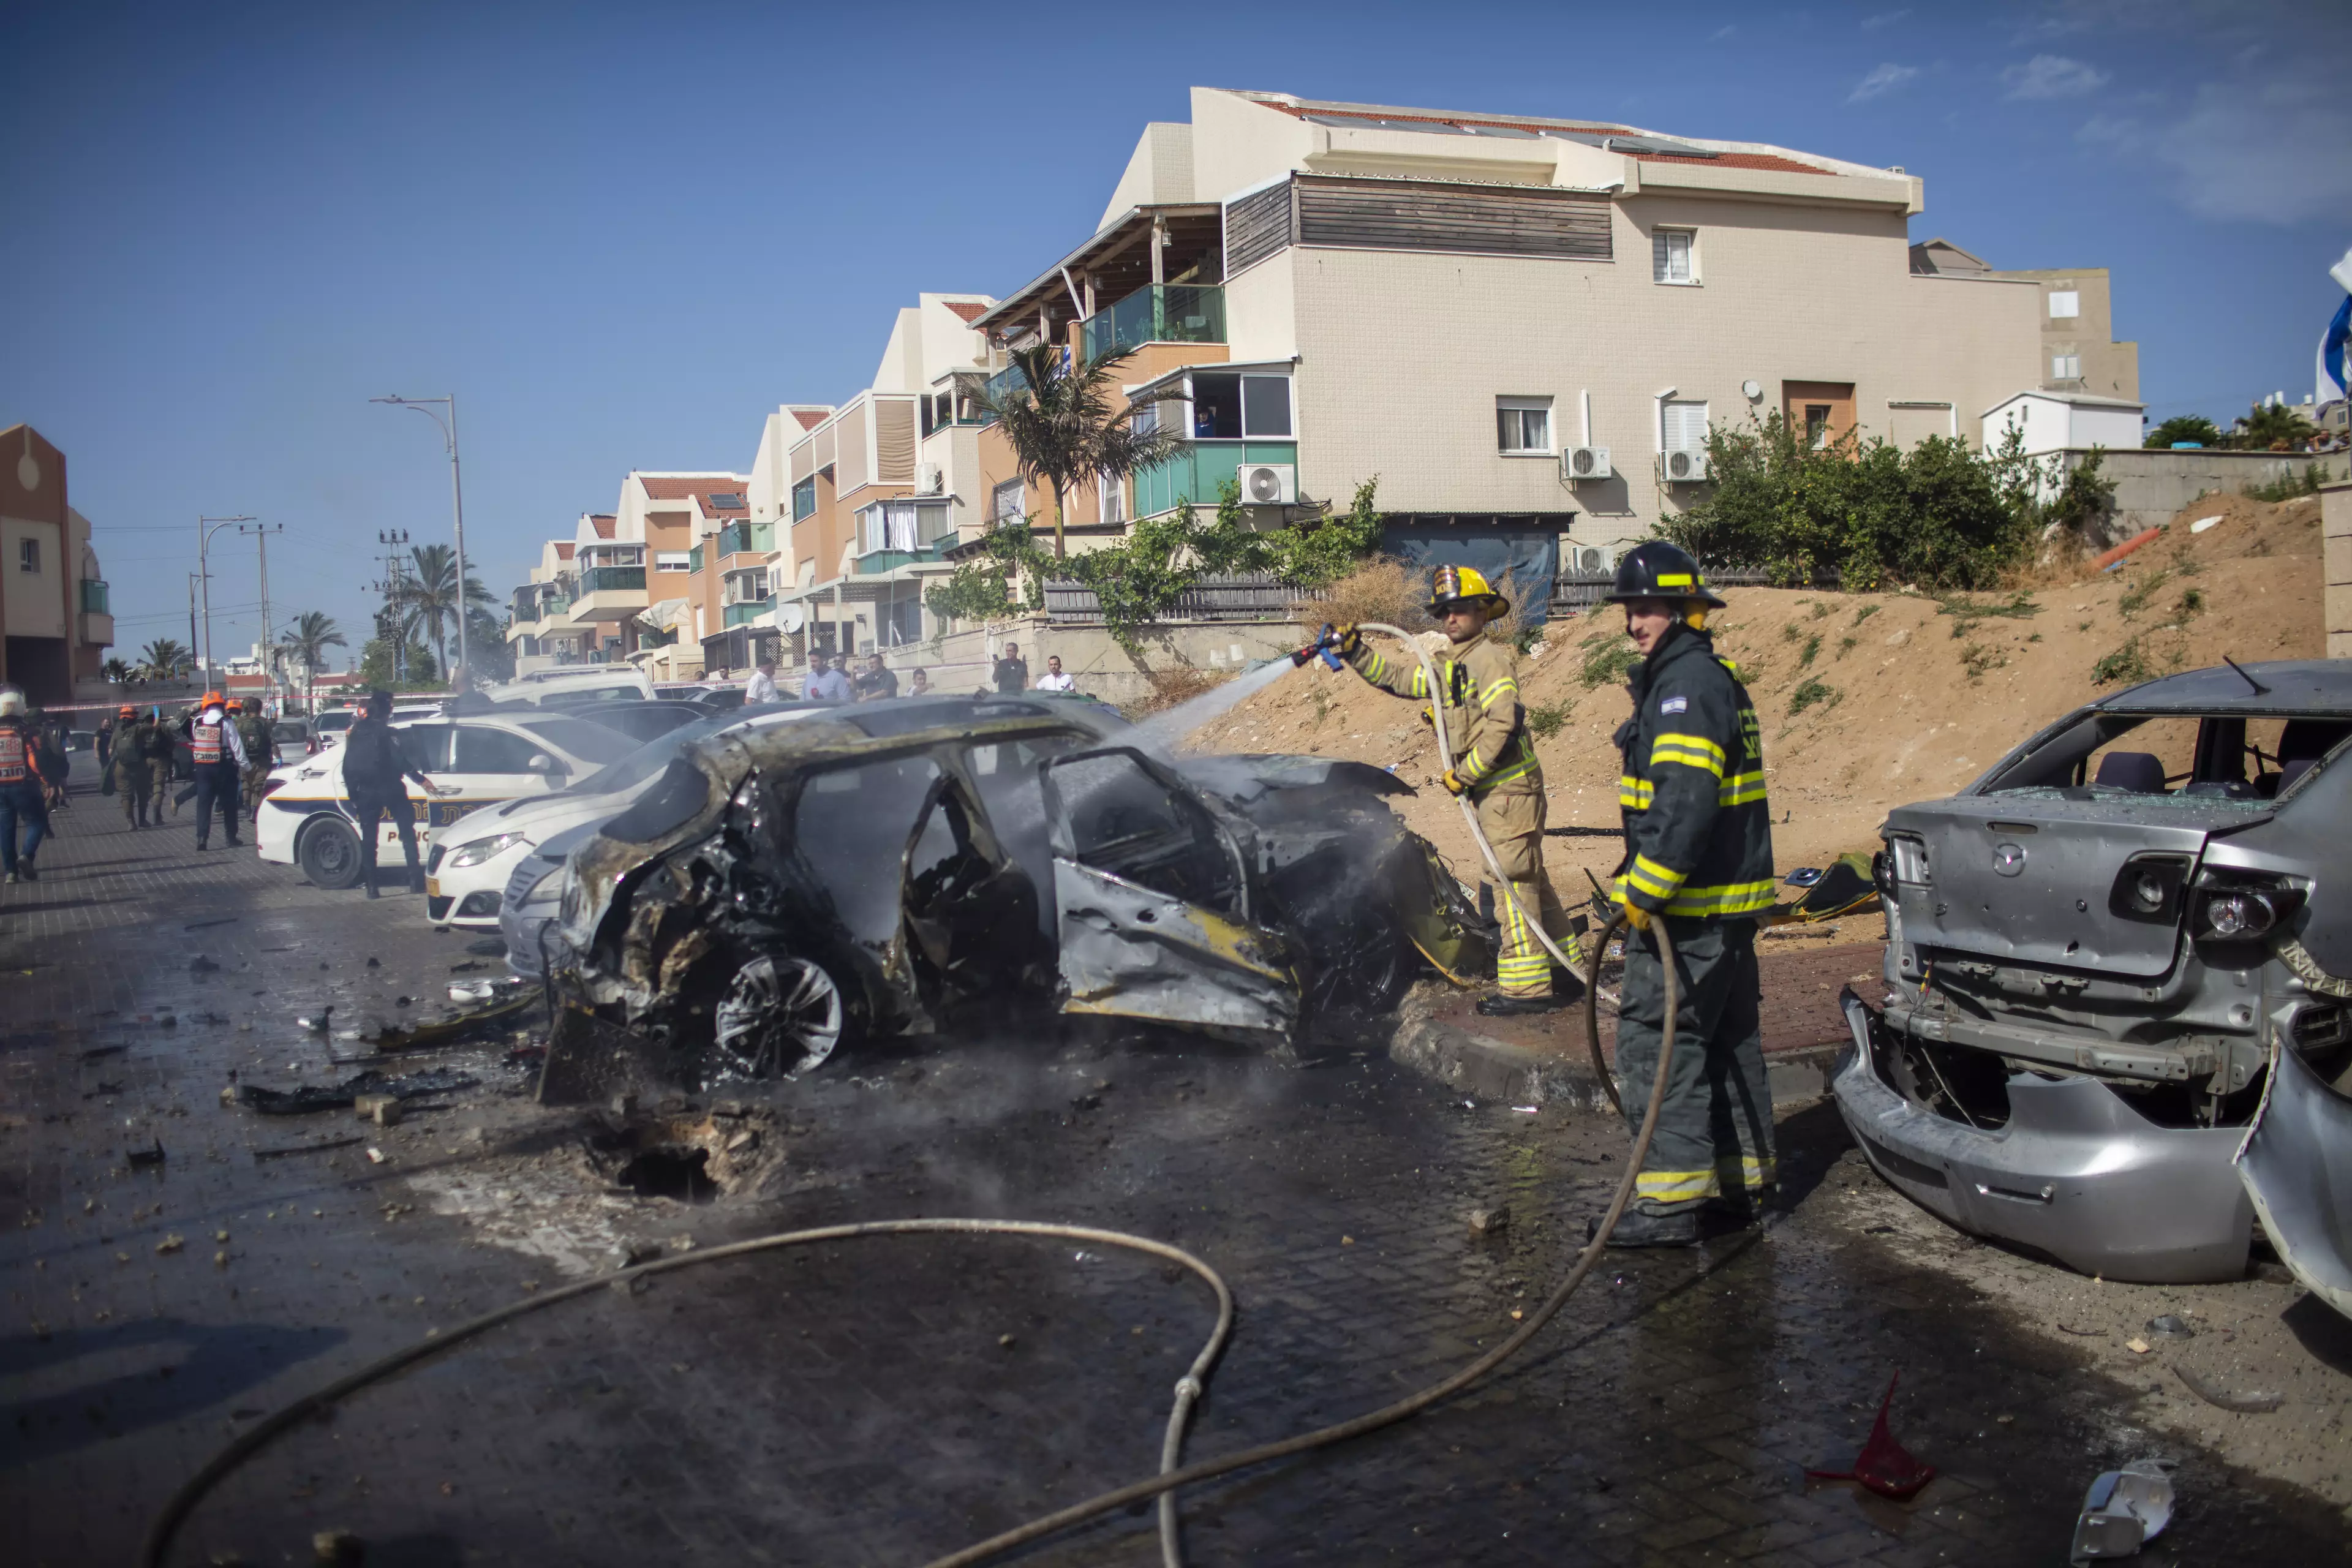 Firefighters extinguish blaze caused by a rocket fired from Gaza Strip towards Israel.